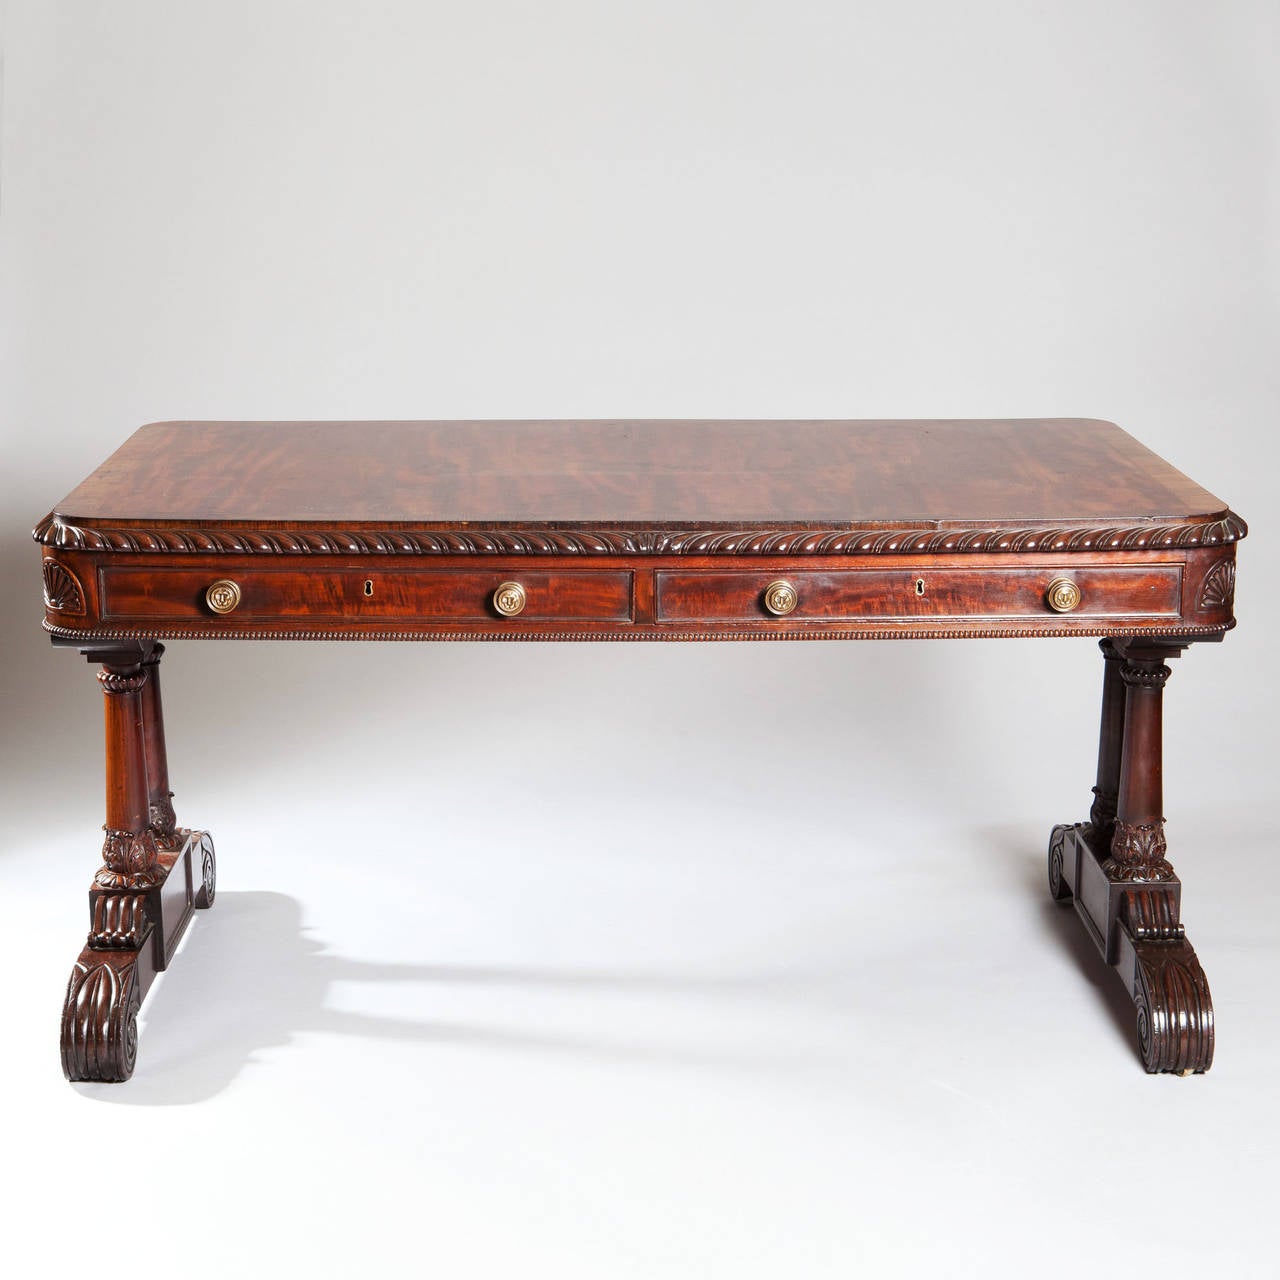 An exceptional early 19th century mahogany writing desk, finished in on all sides, the top with two long drawers in the front and two dummy drawers in the back between a thumb moulding of gadrooning and beading, the top supported on double column